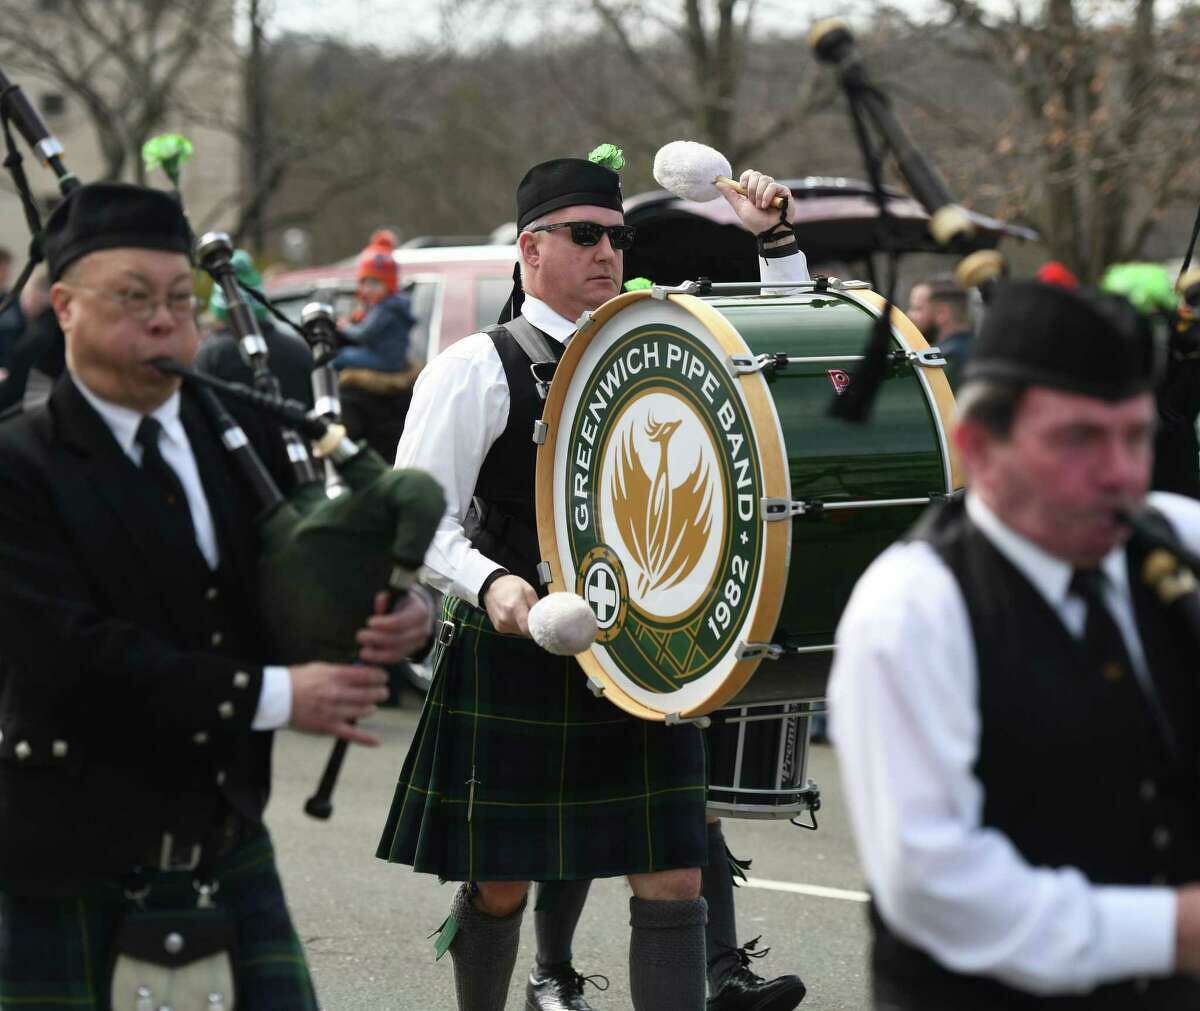 The annual St. Patrick's Day Parade in Greenwich was last held in March 2019, but it will return in 2022.